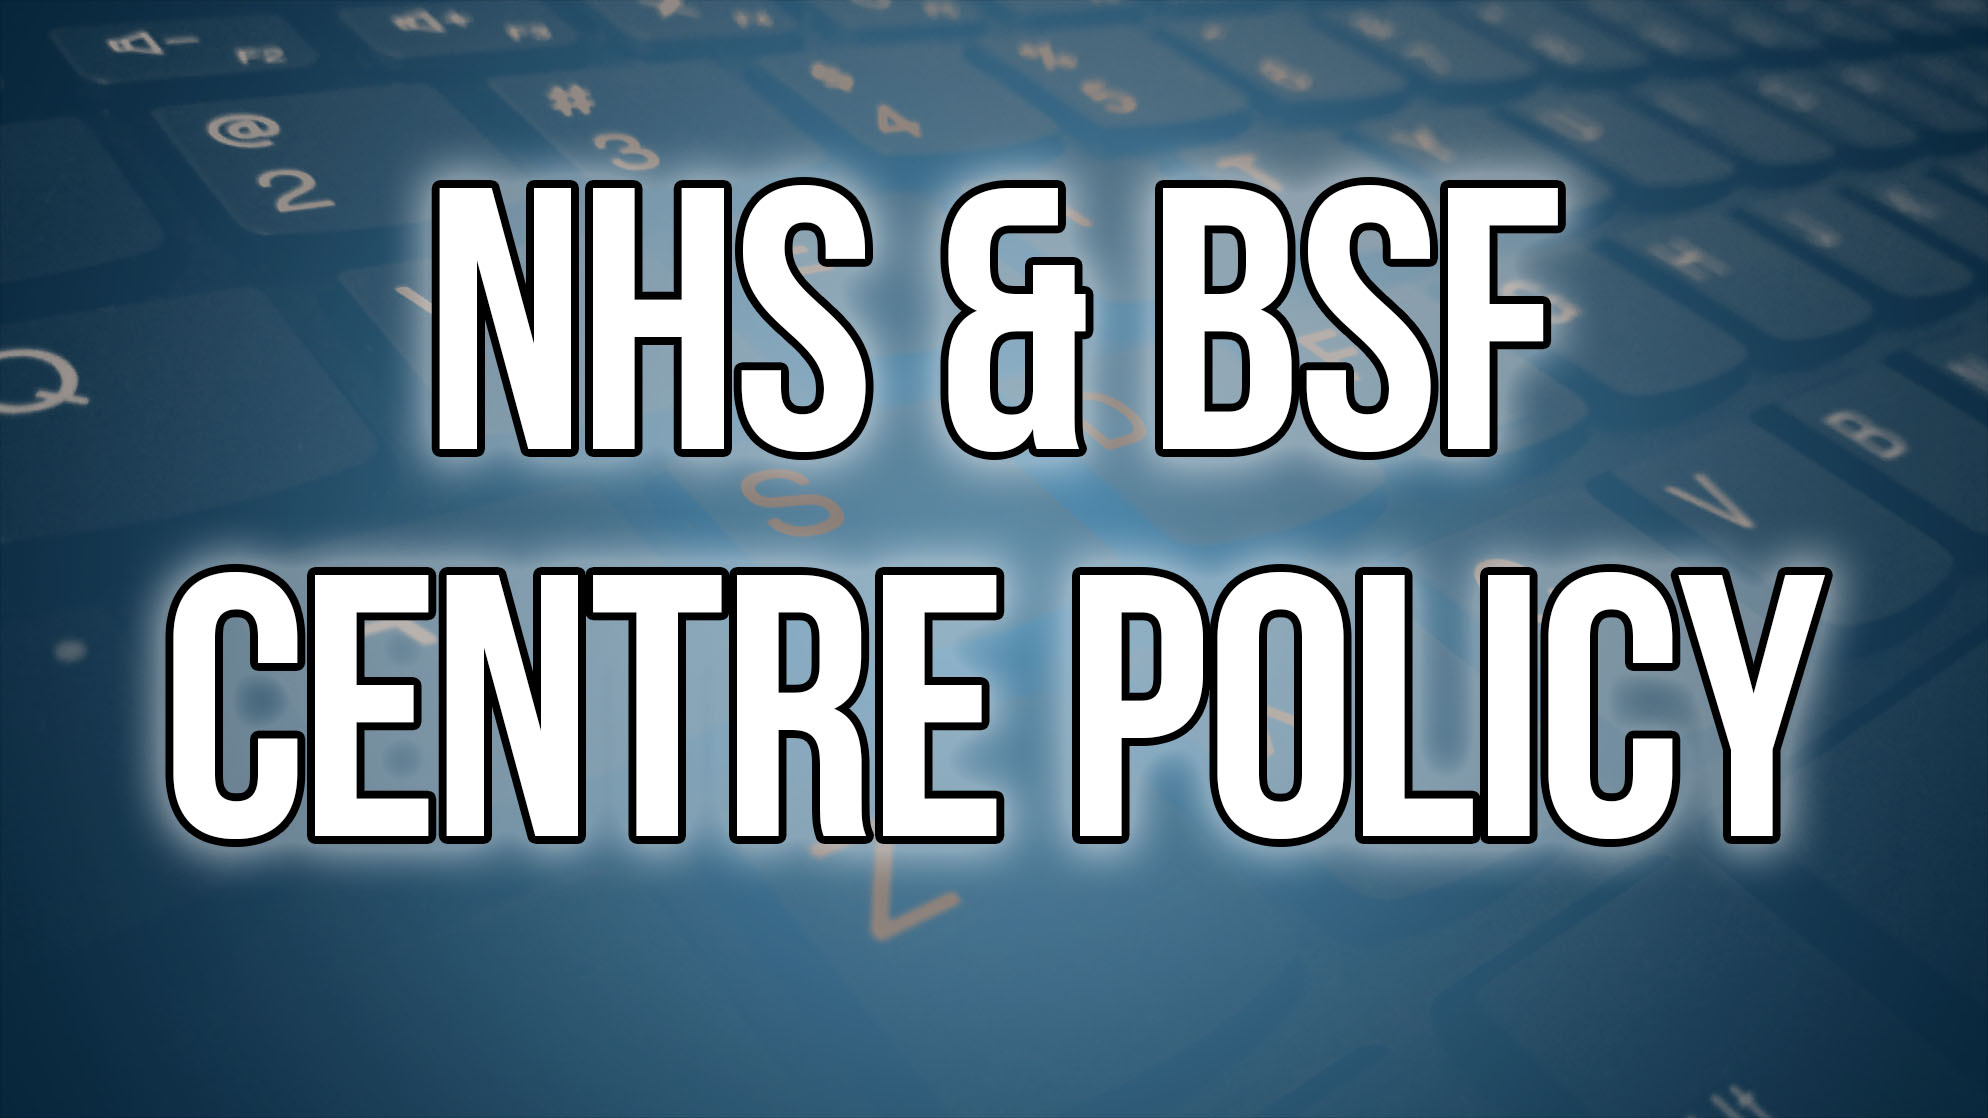 NHS & BSF Centre Policy